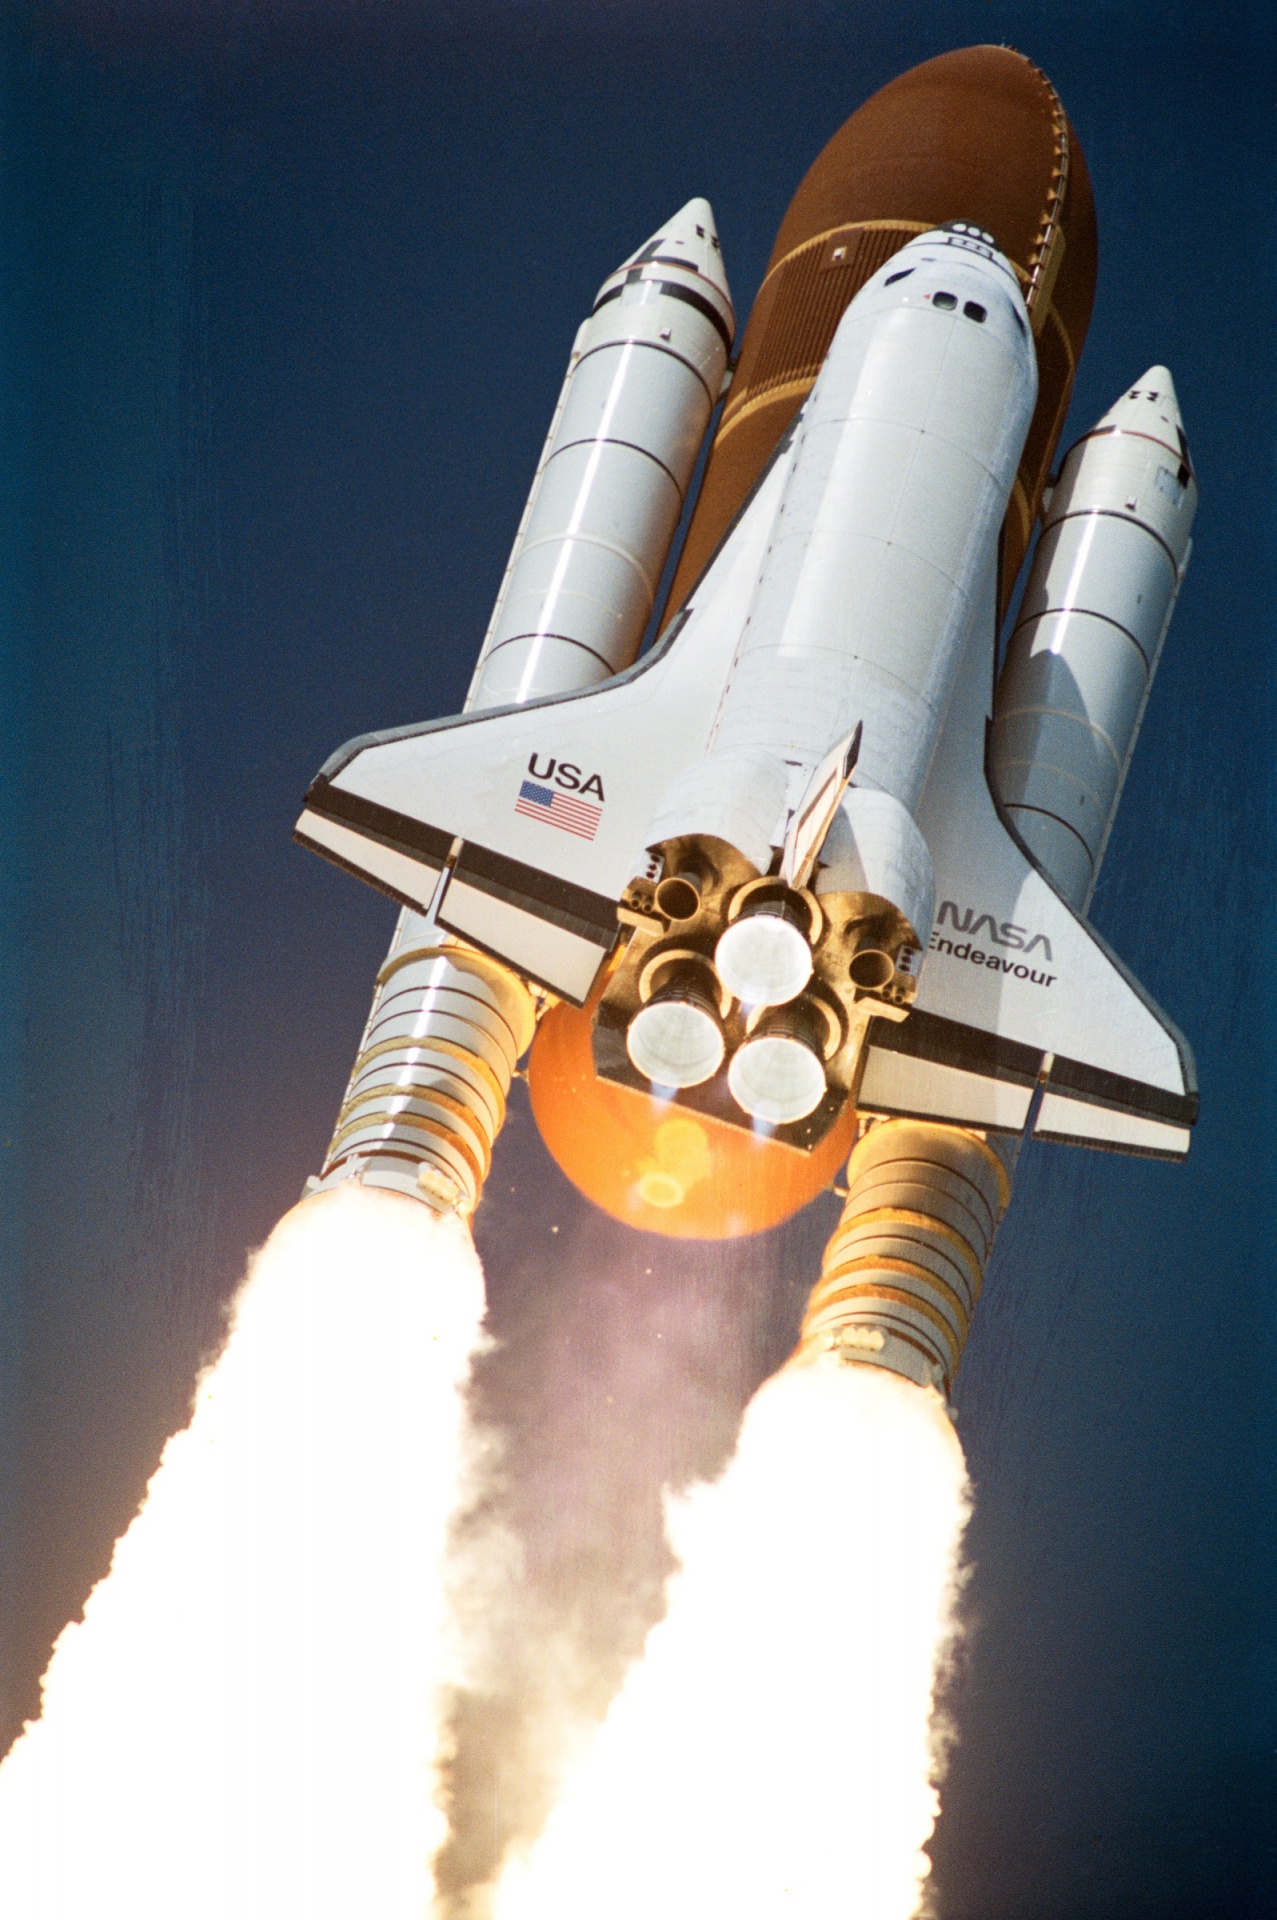 endeavour space shuttle free photo